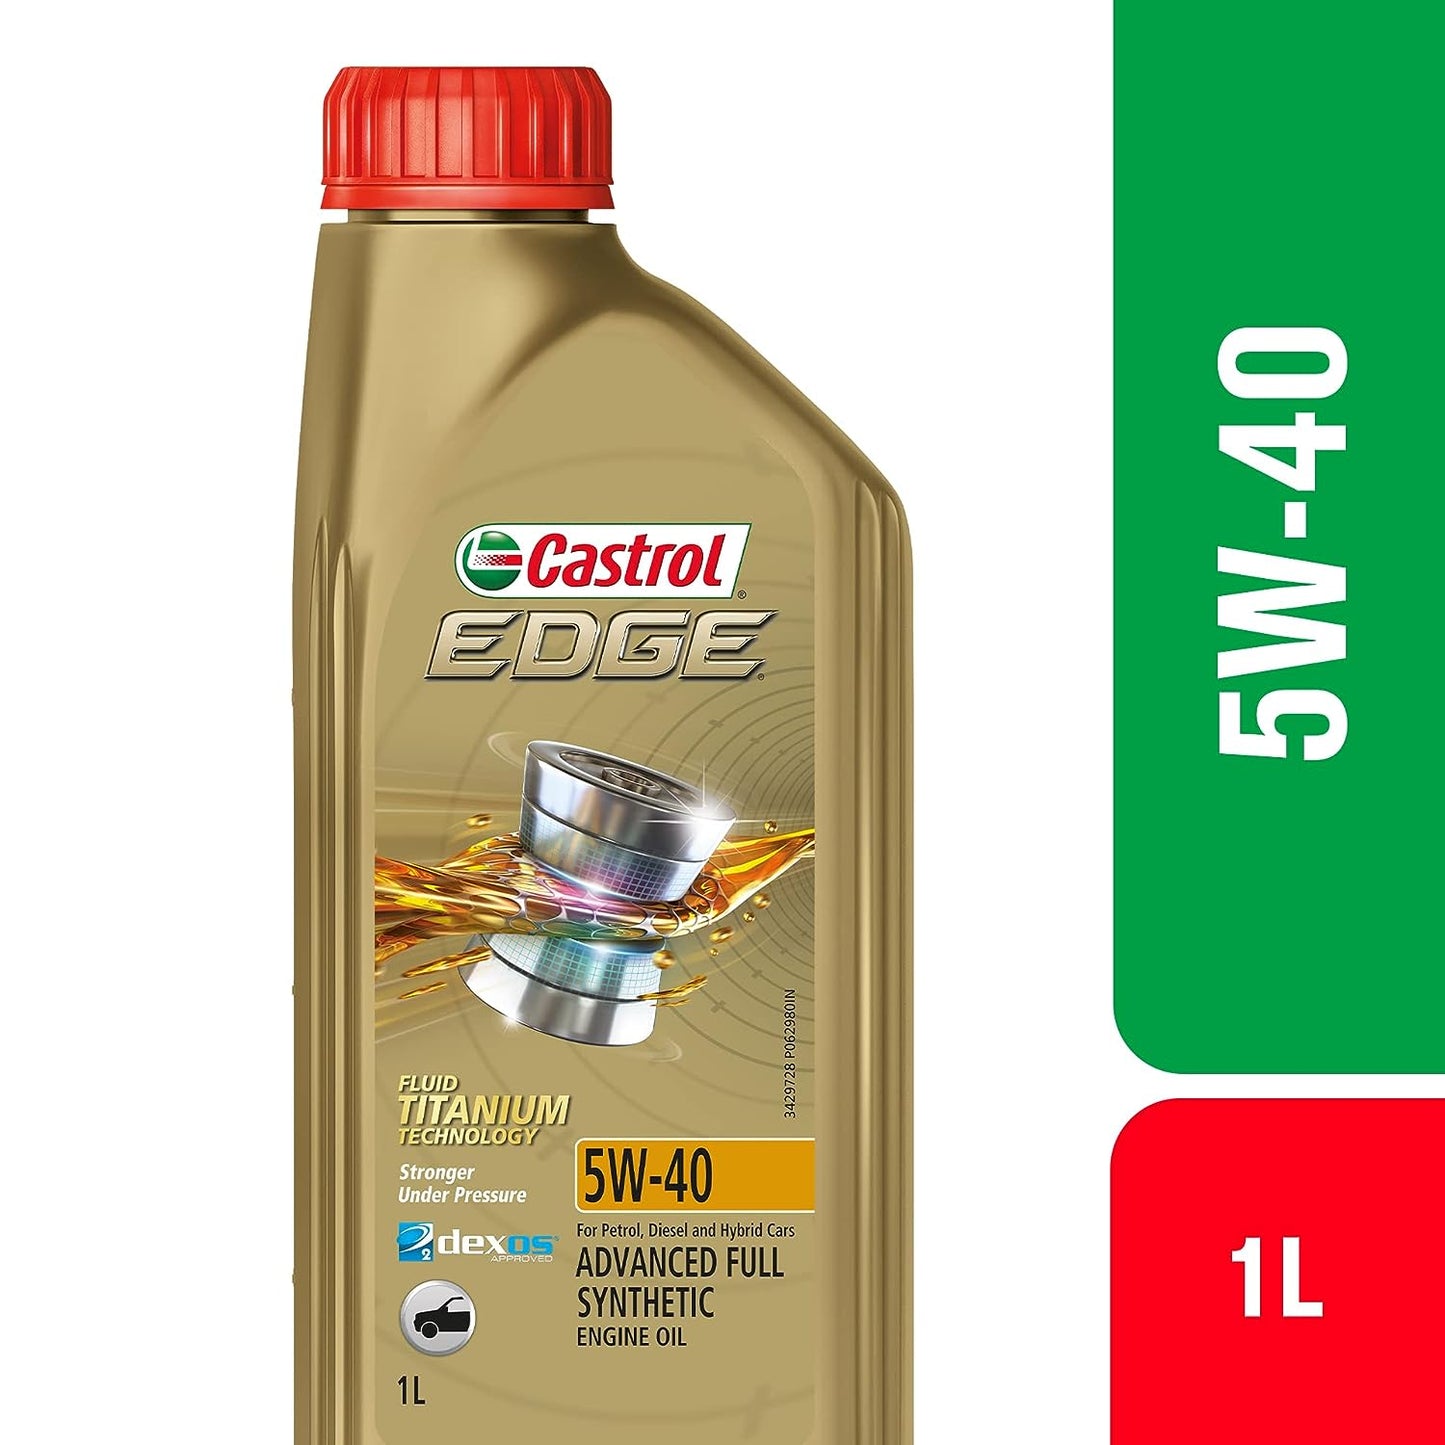 Castrol EDGE 5W-40 Full Synthetic Engine Oil 1L | Compatible with Car